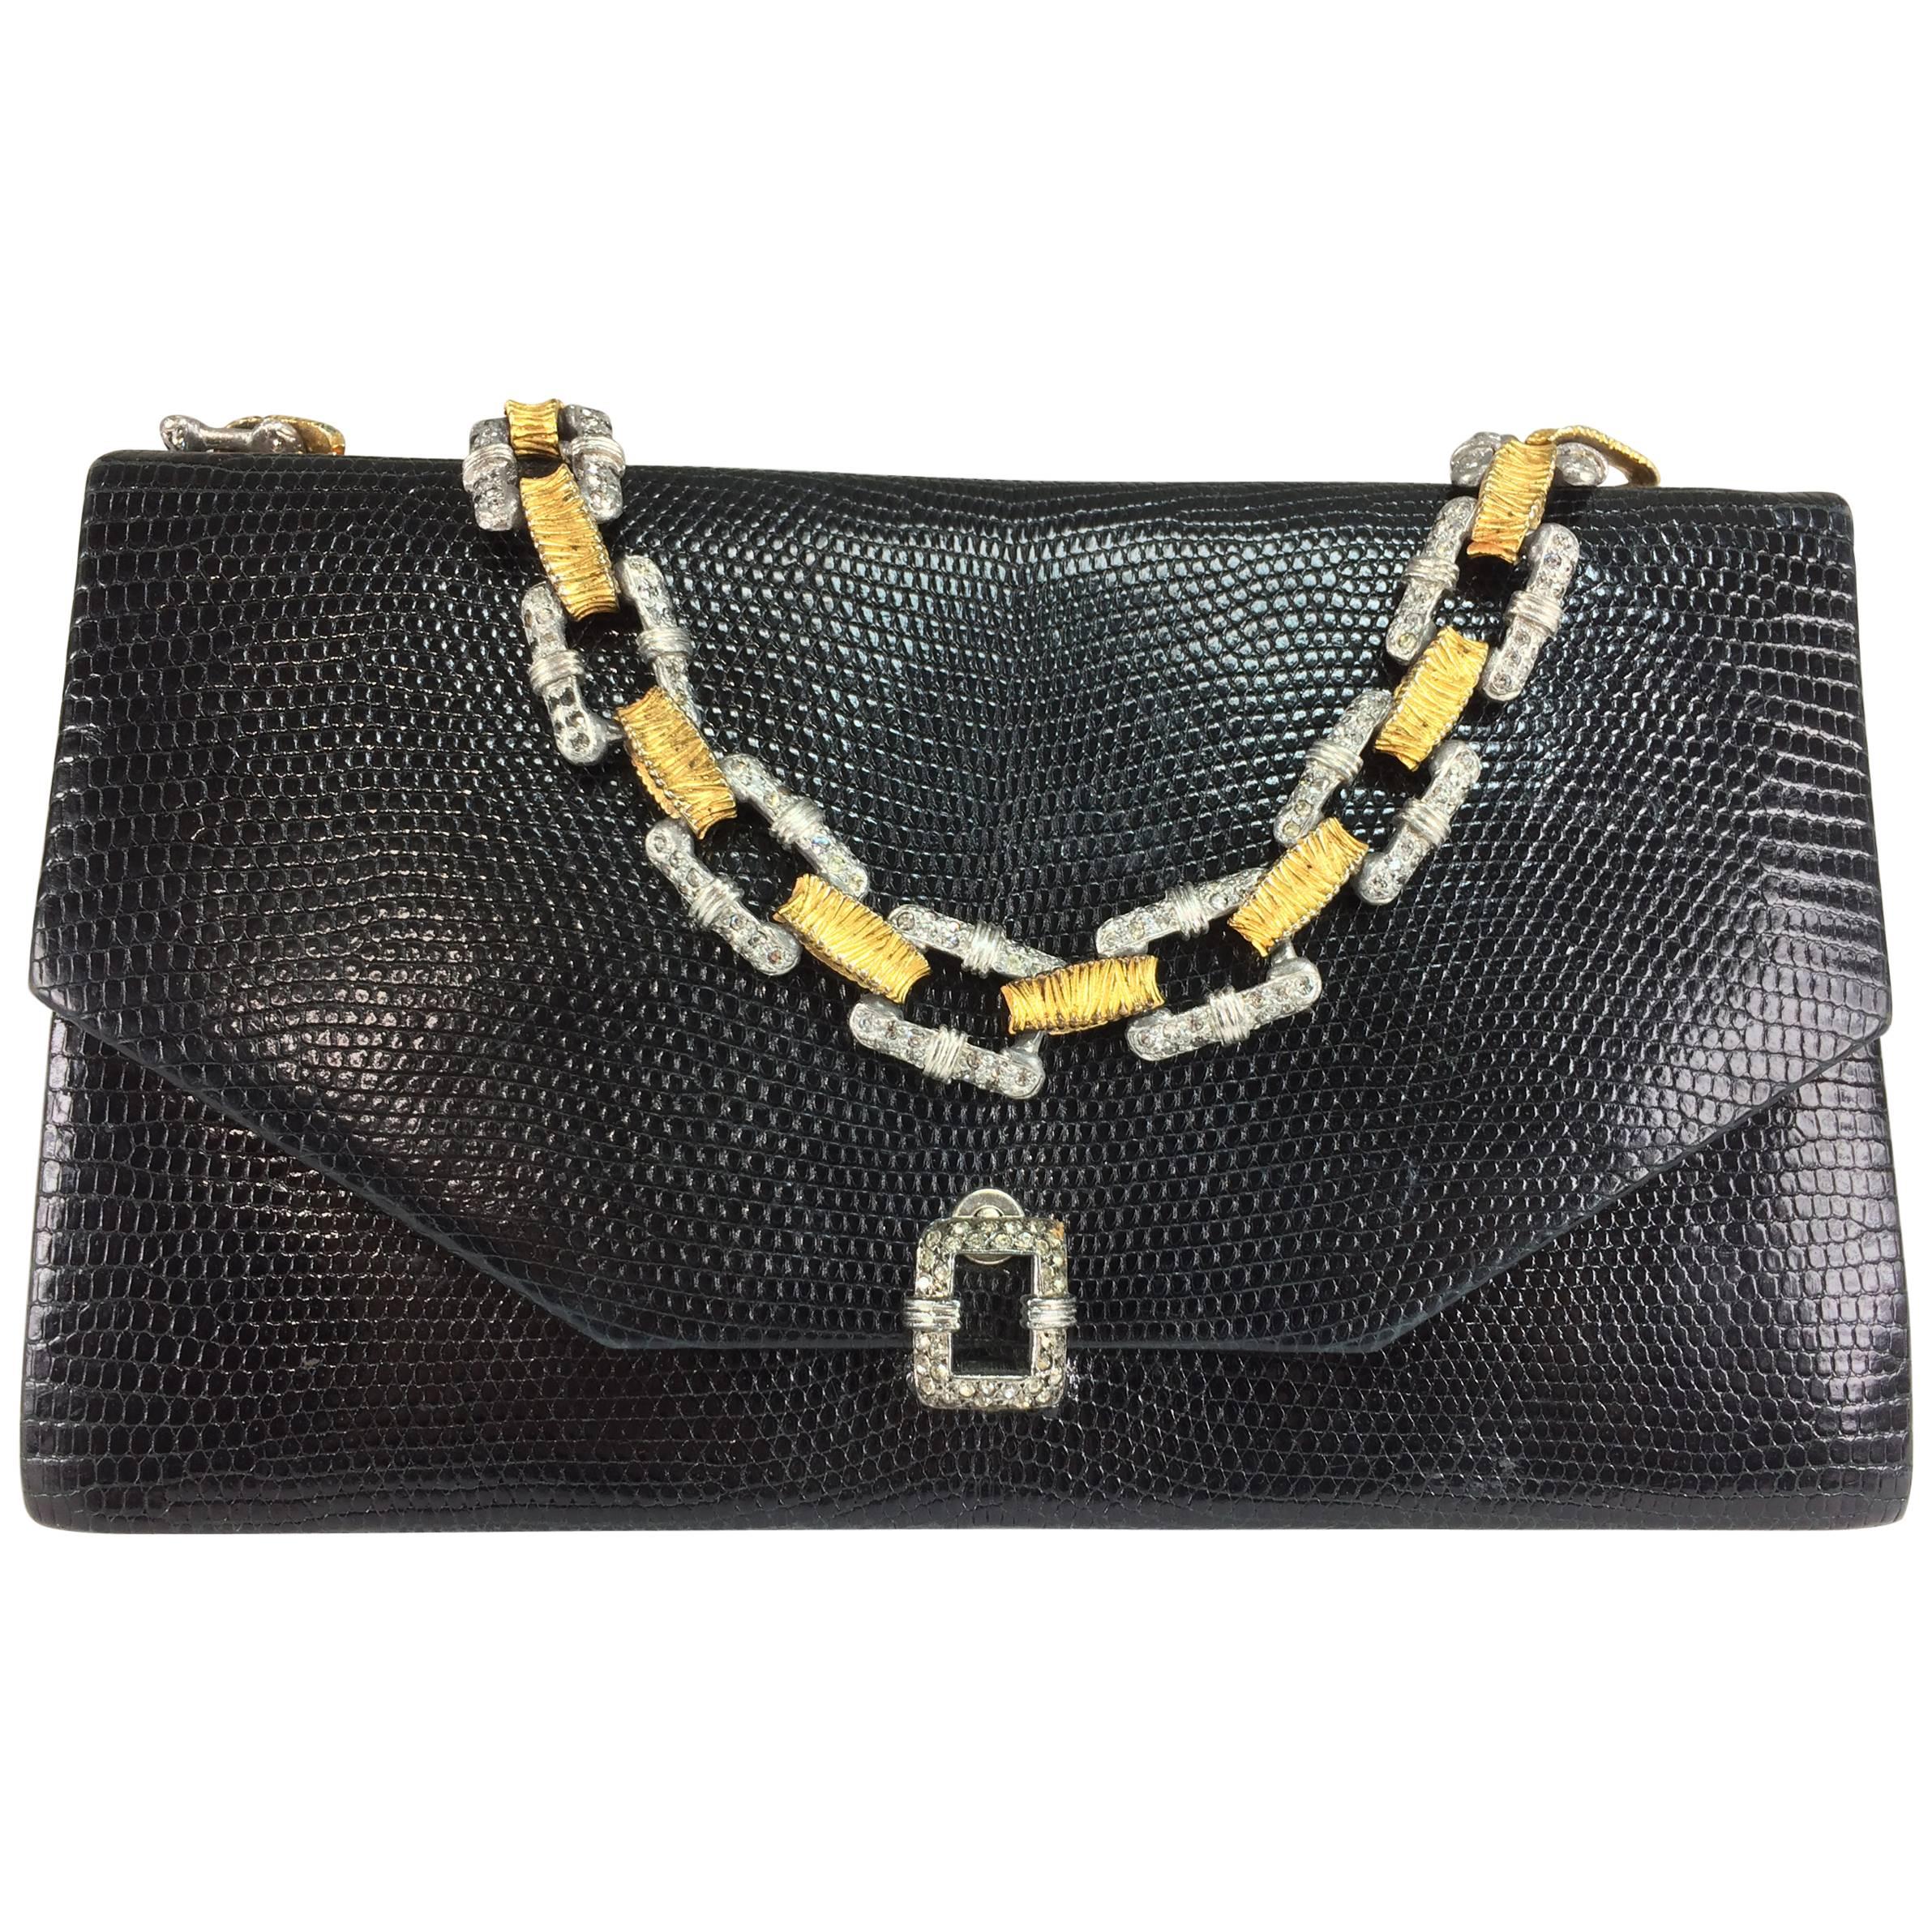 Jacomo glazed black lizard evening bag with silver & gold chain handle 1960s